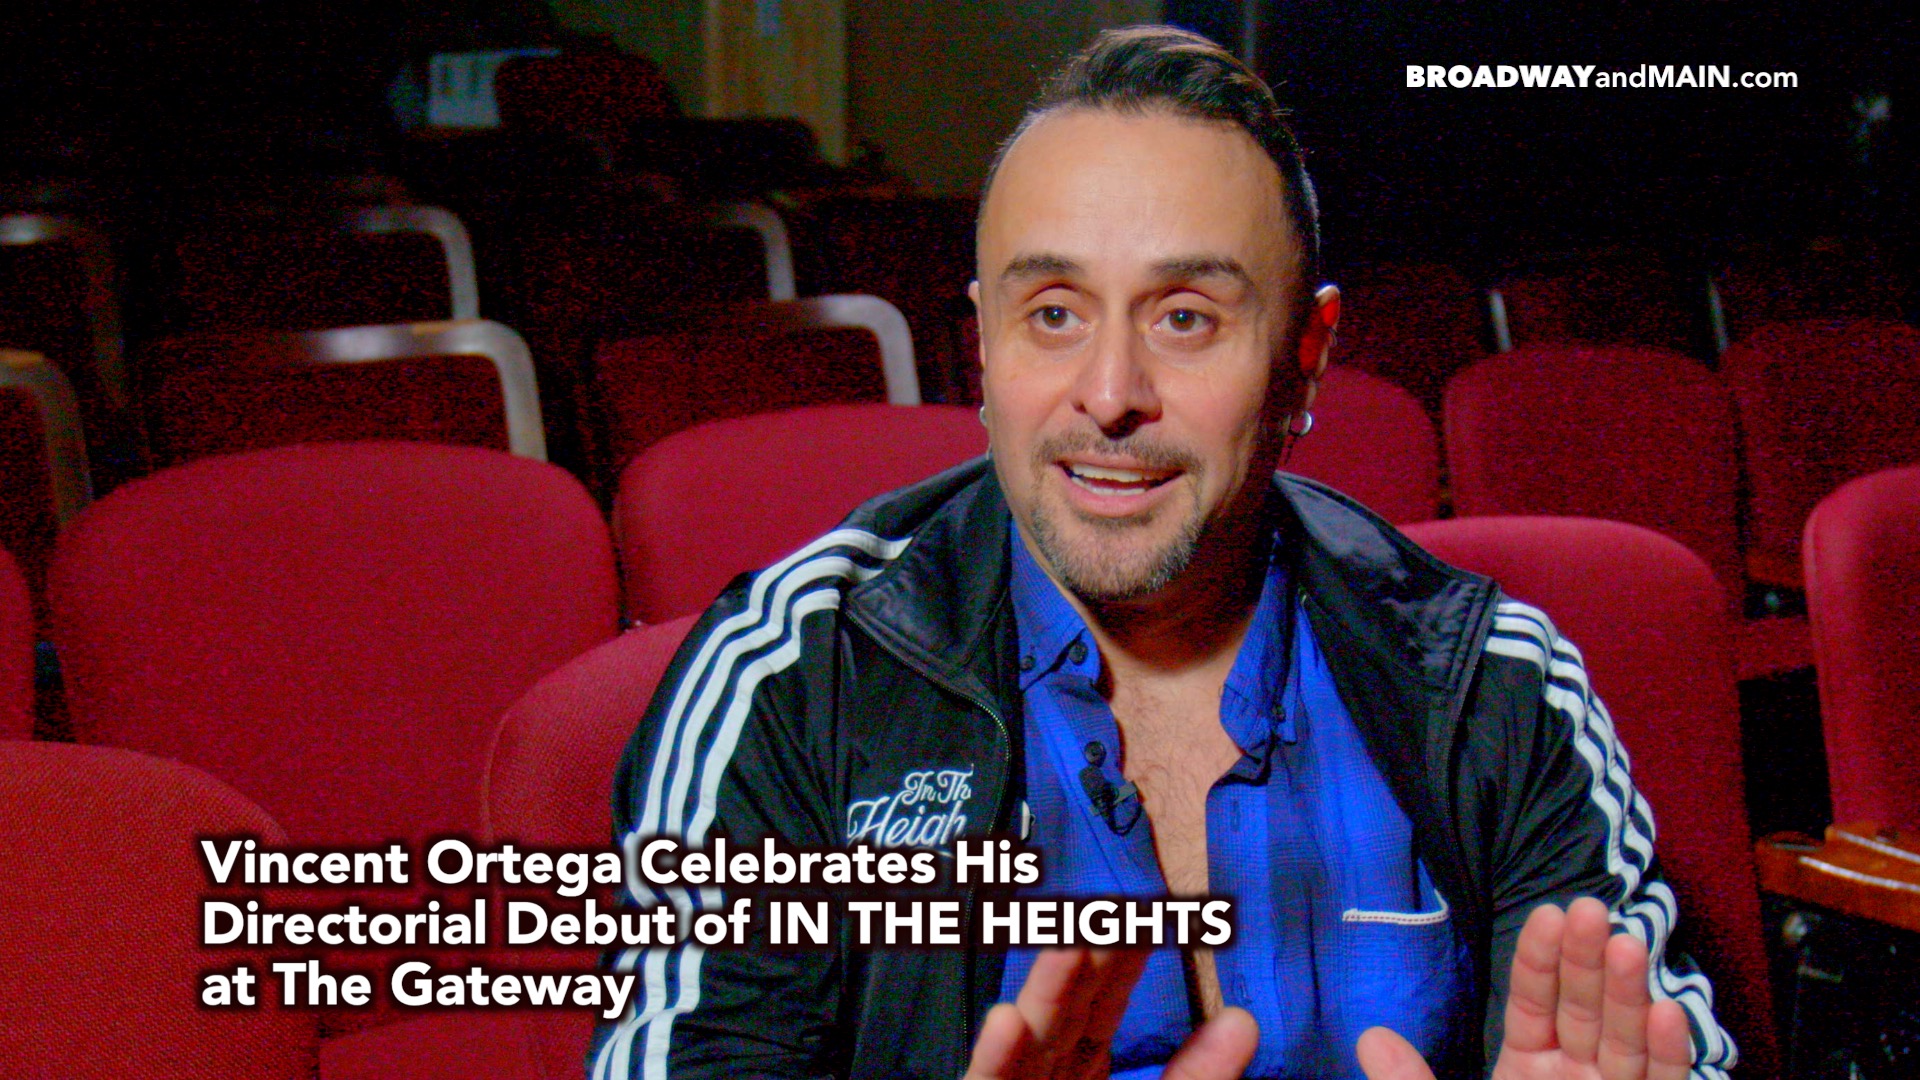 Vincent Ortega Celebrates His Directorial Debut of IN THE HEIGHTS at The Gateway